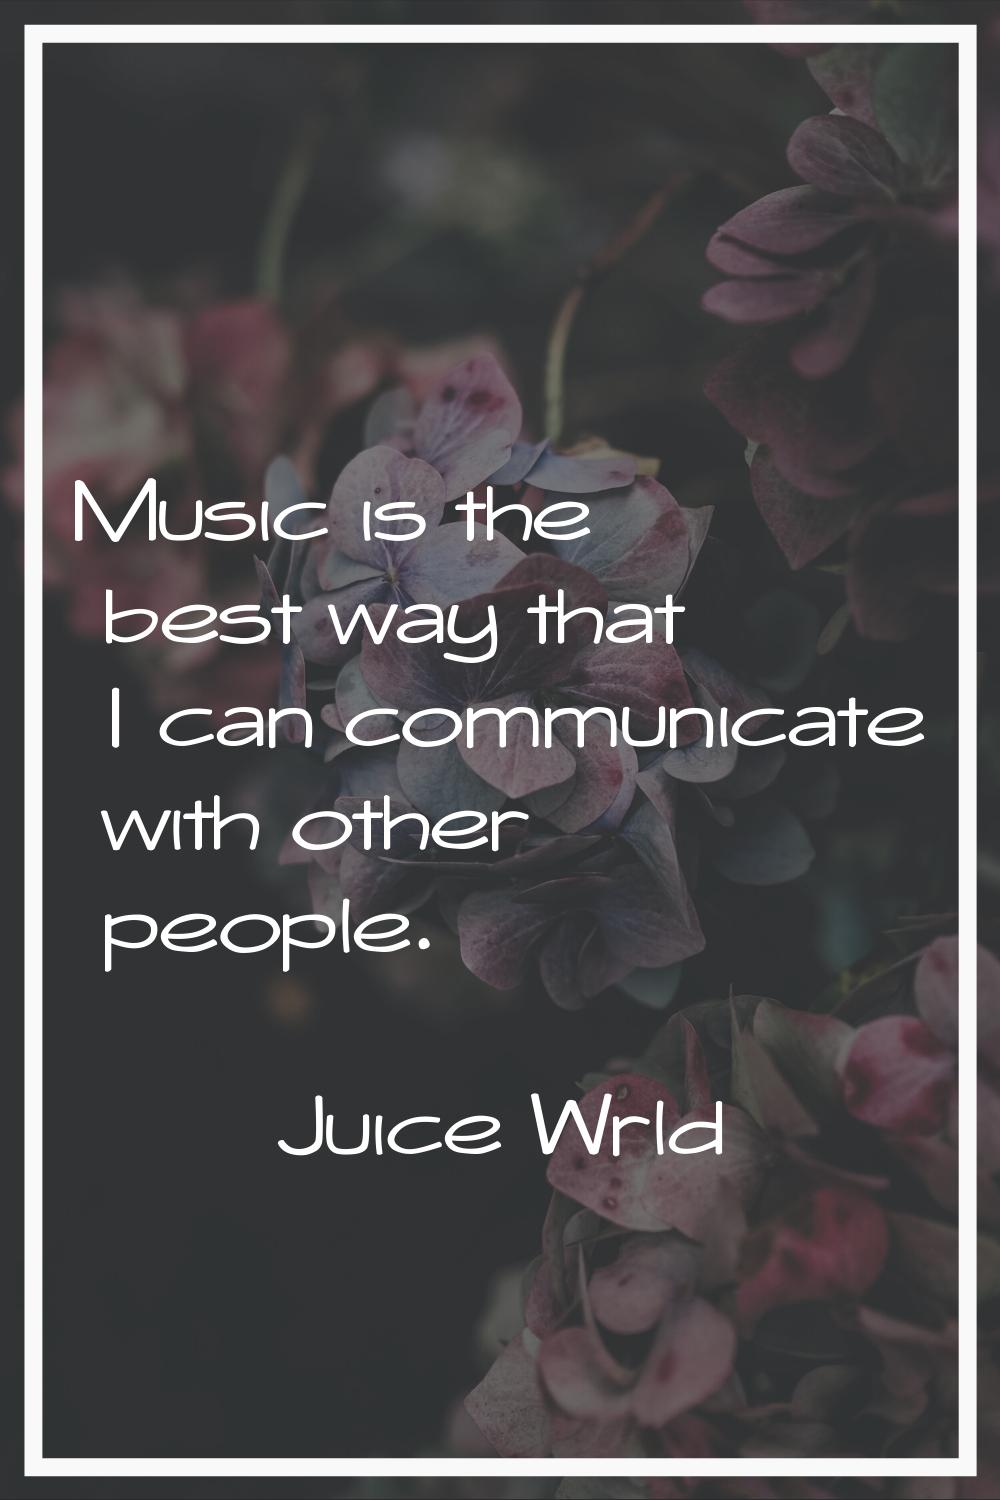 Music is the best way that I can communicate with other people.